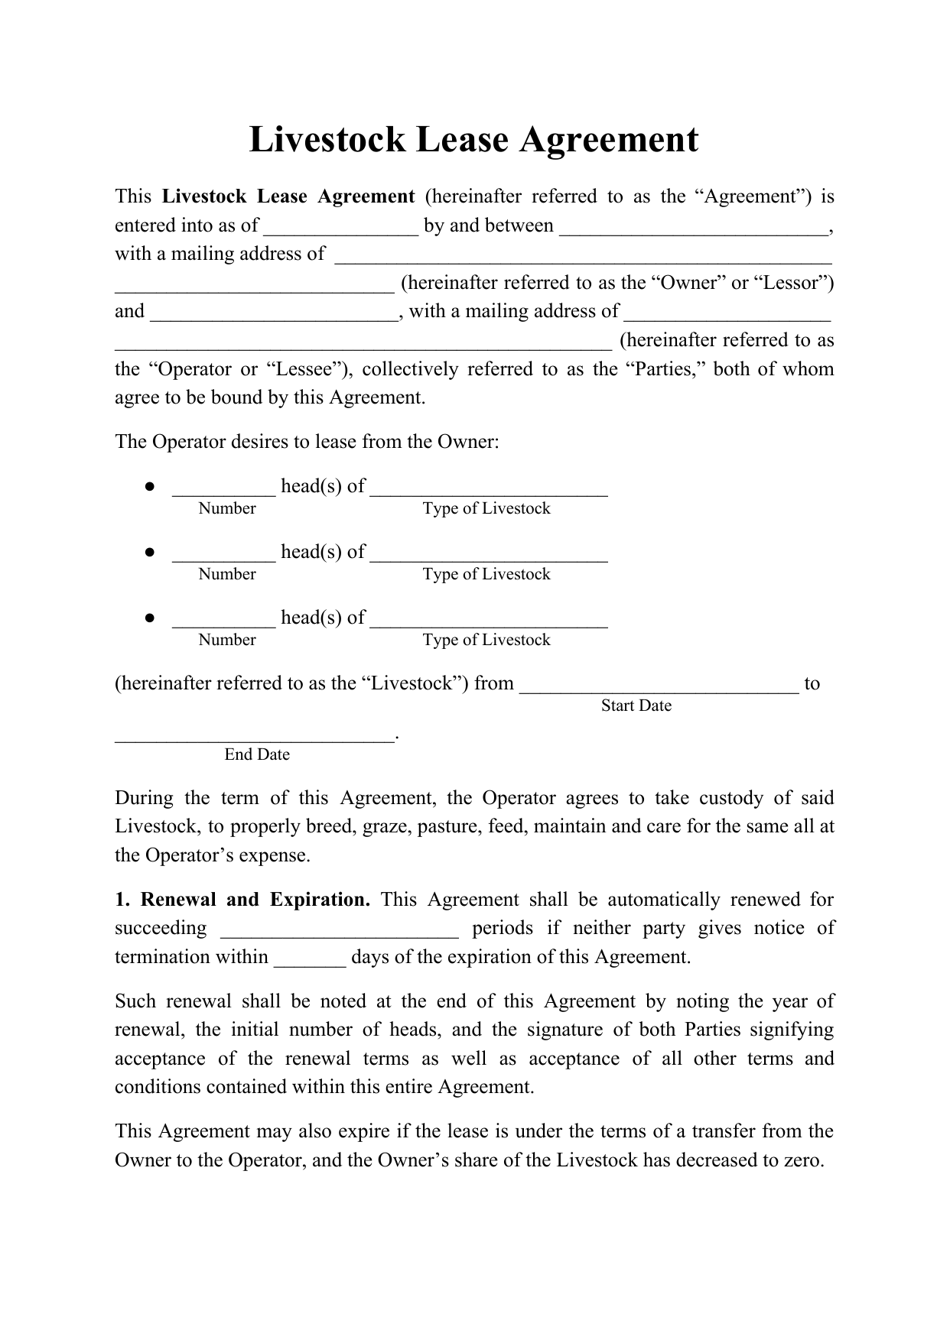 Livestock Lease Agreement Template Download Printable PDF For share farming agreement template